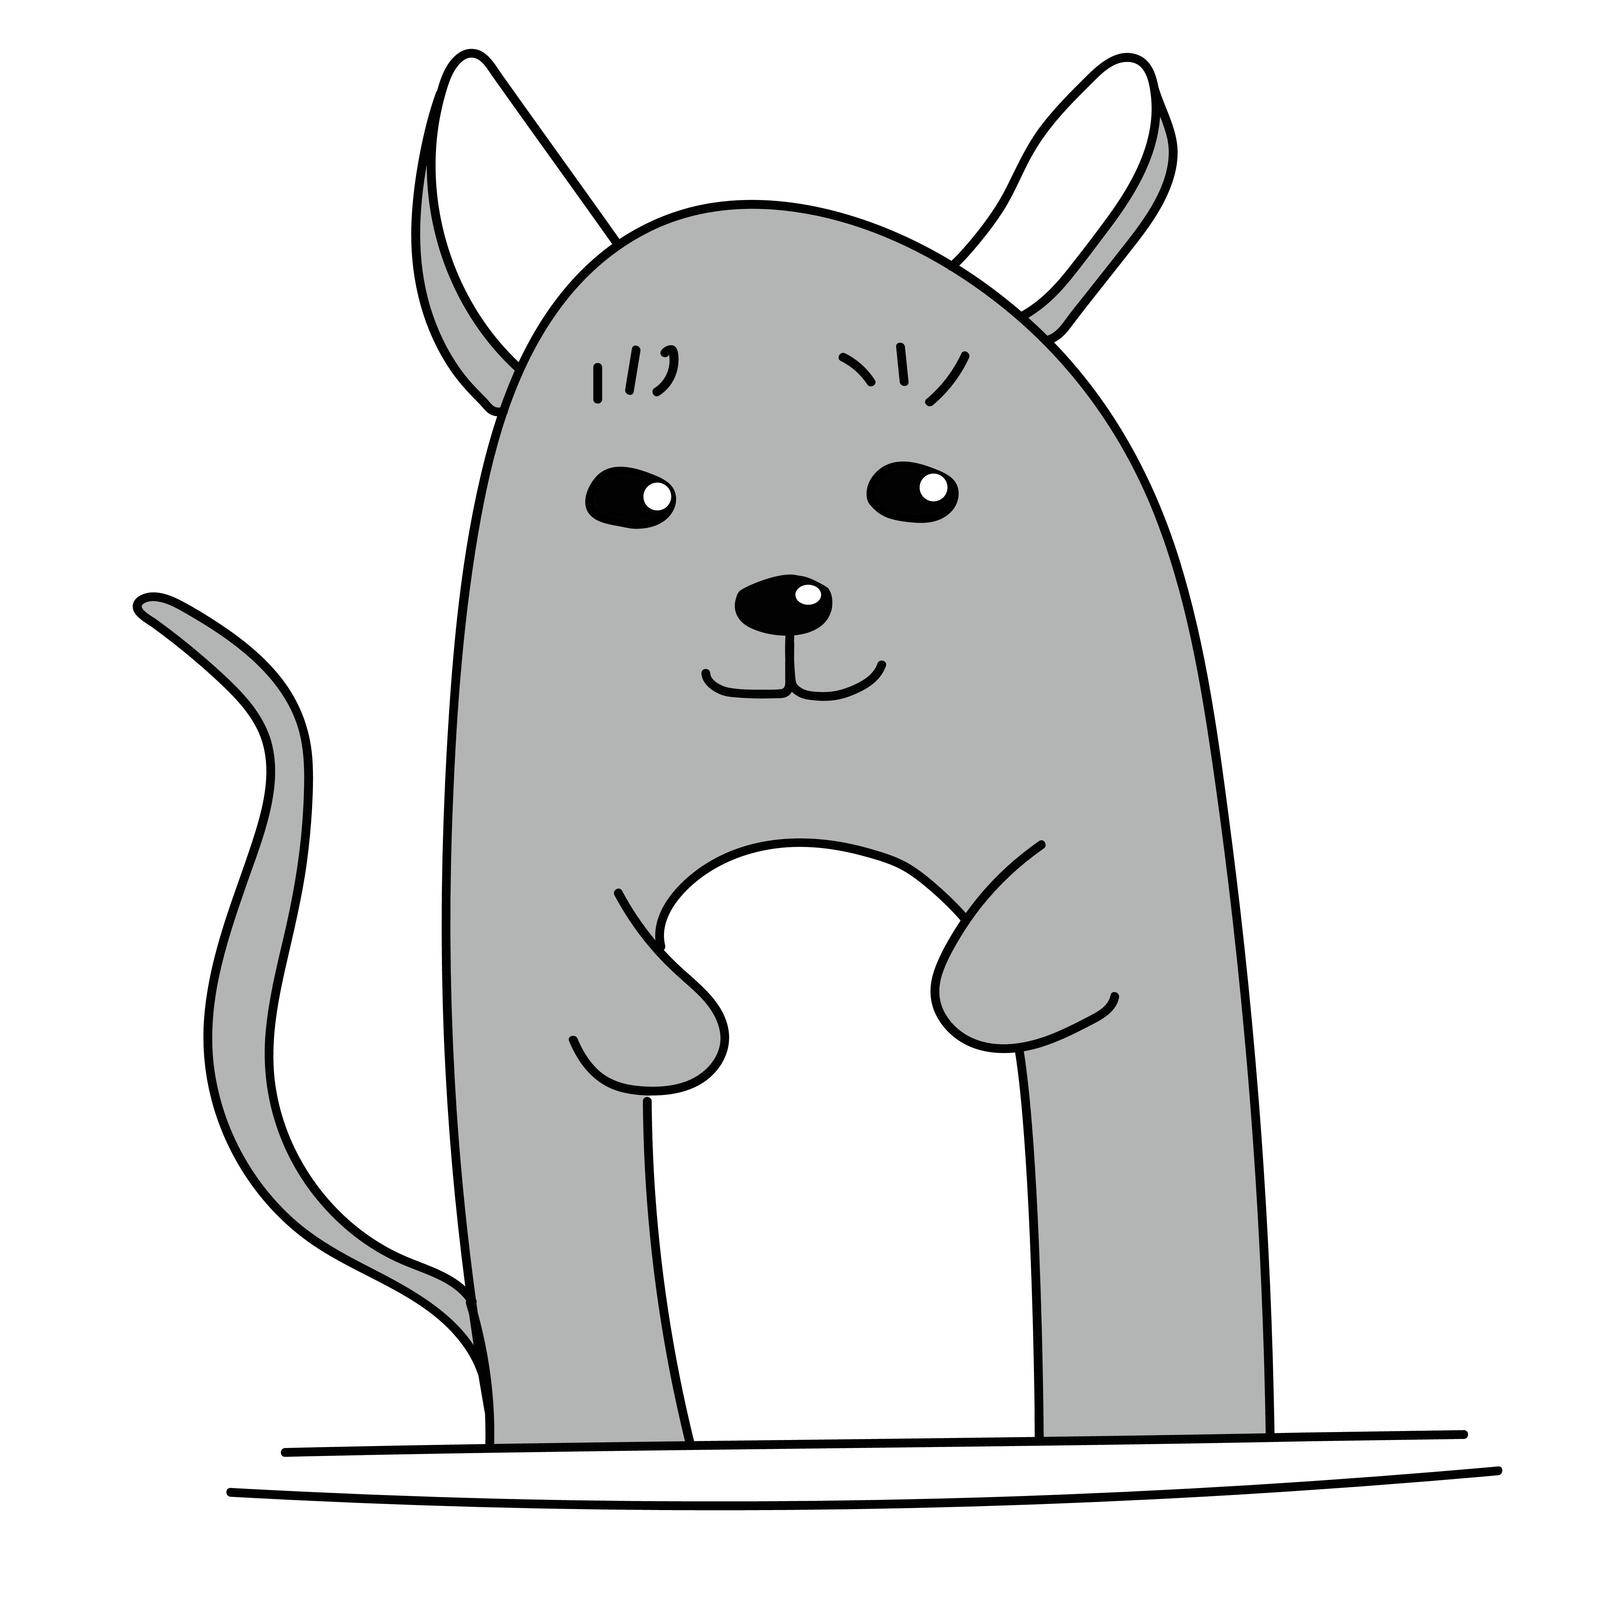 Funny gray cartoon mouse. Vector illustration with a little mouse